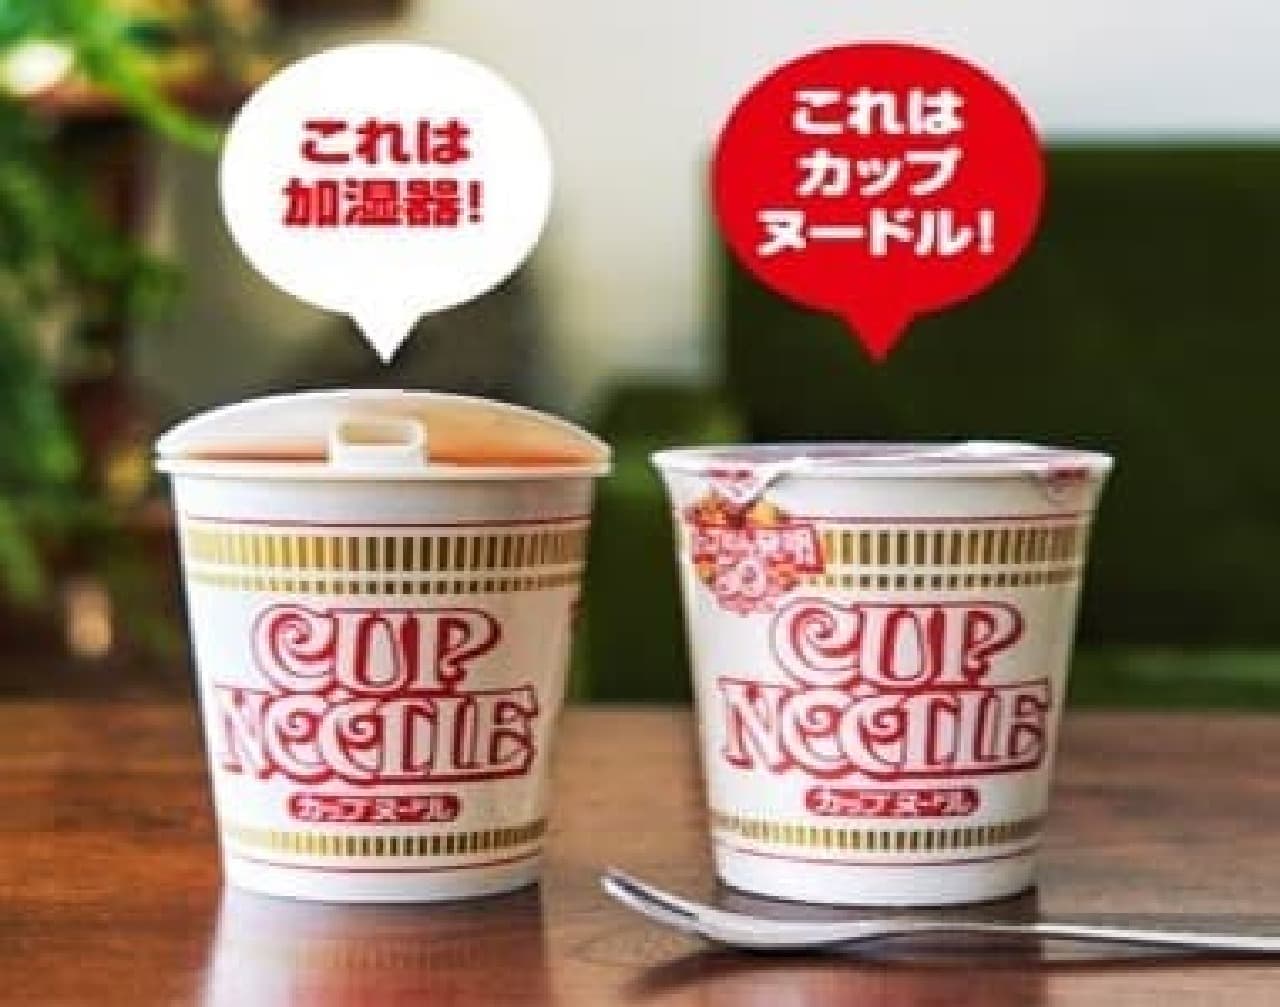 To commemorate the 50th anniversary of the release of "Cup Noodle"